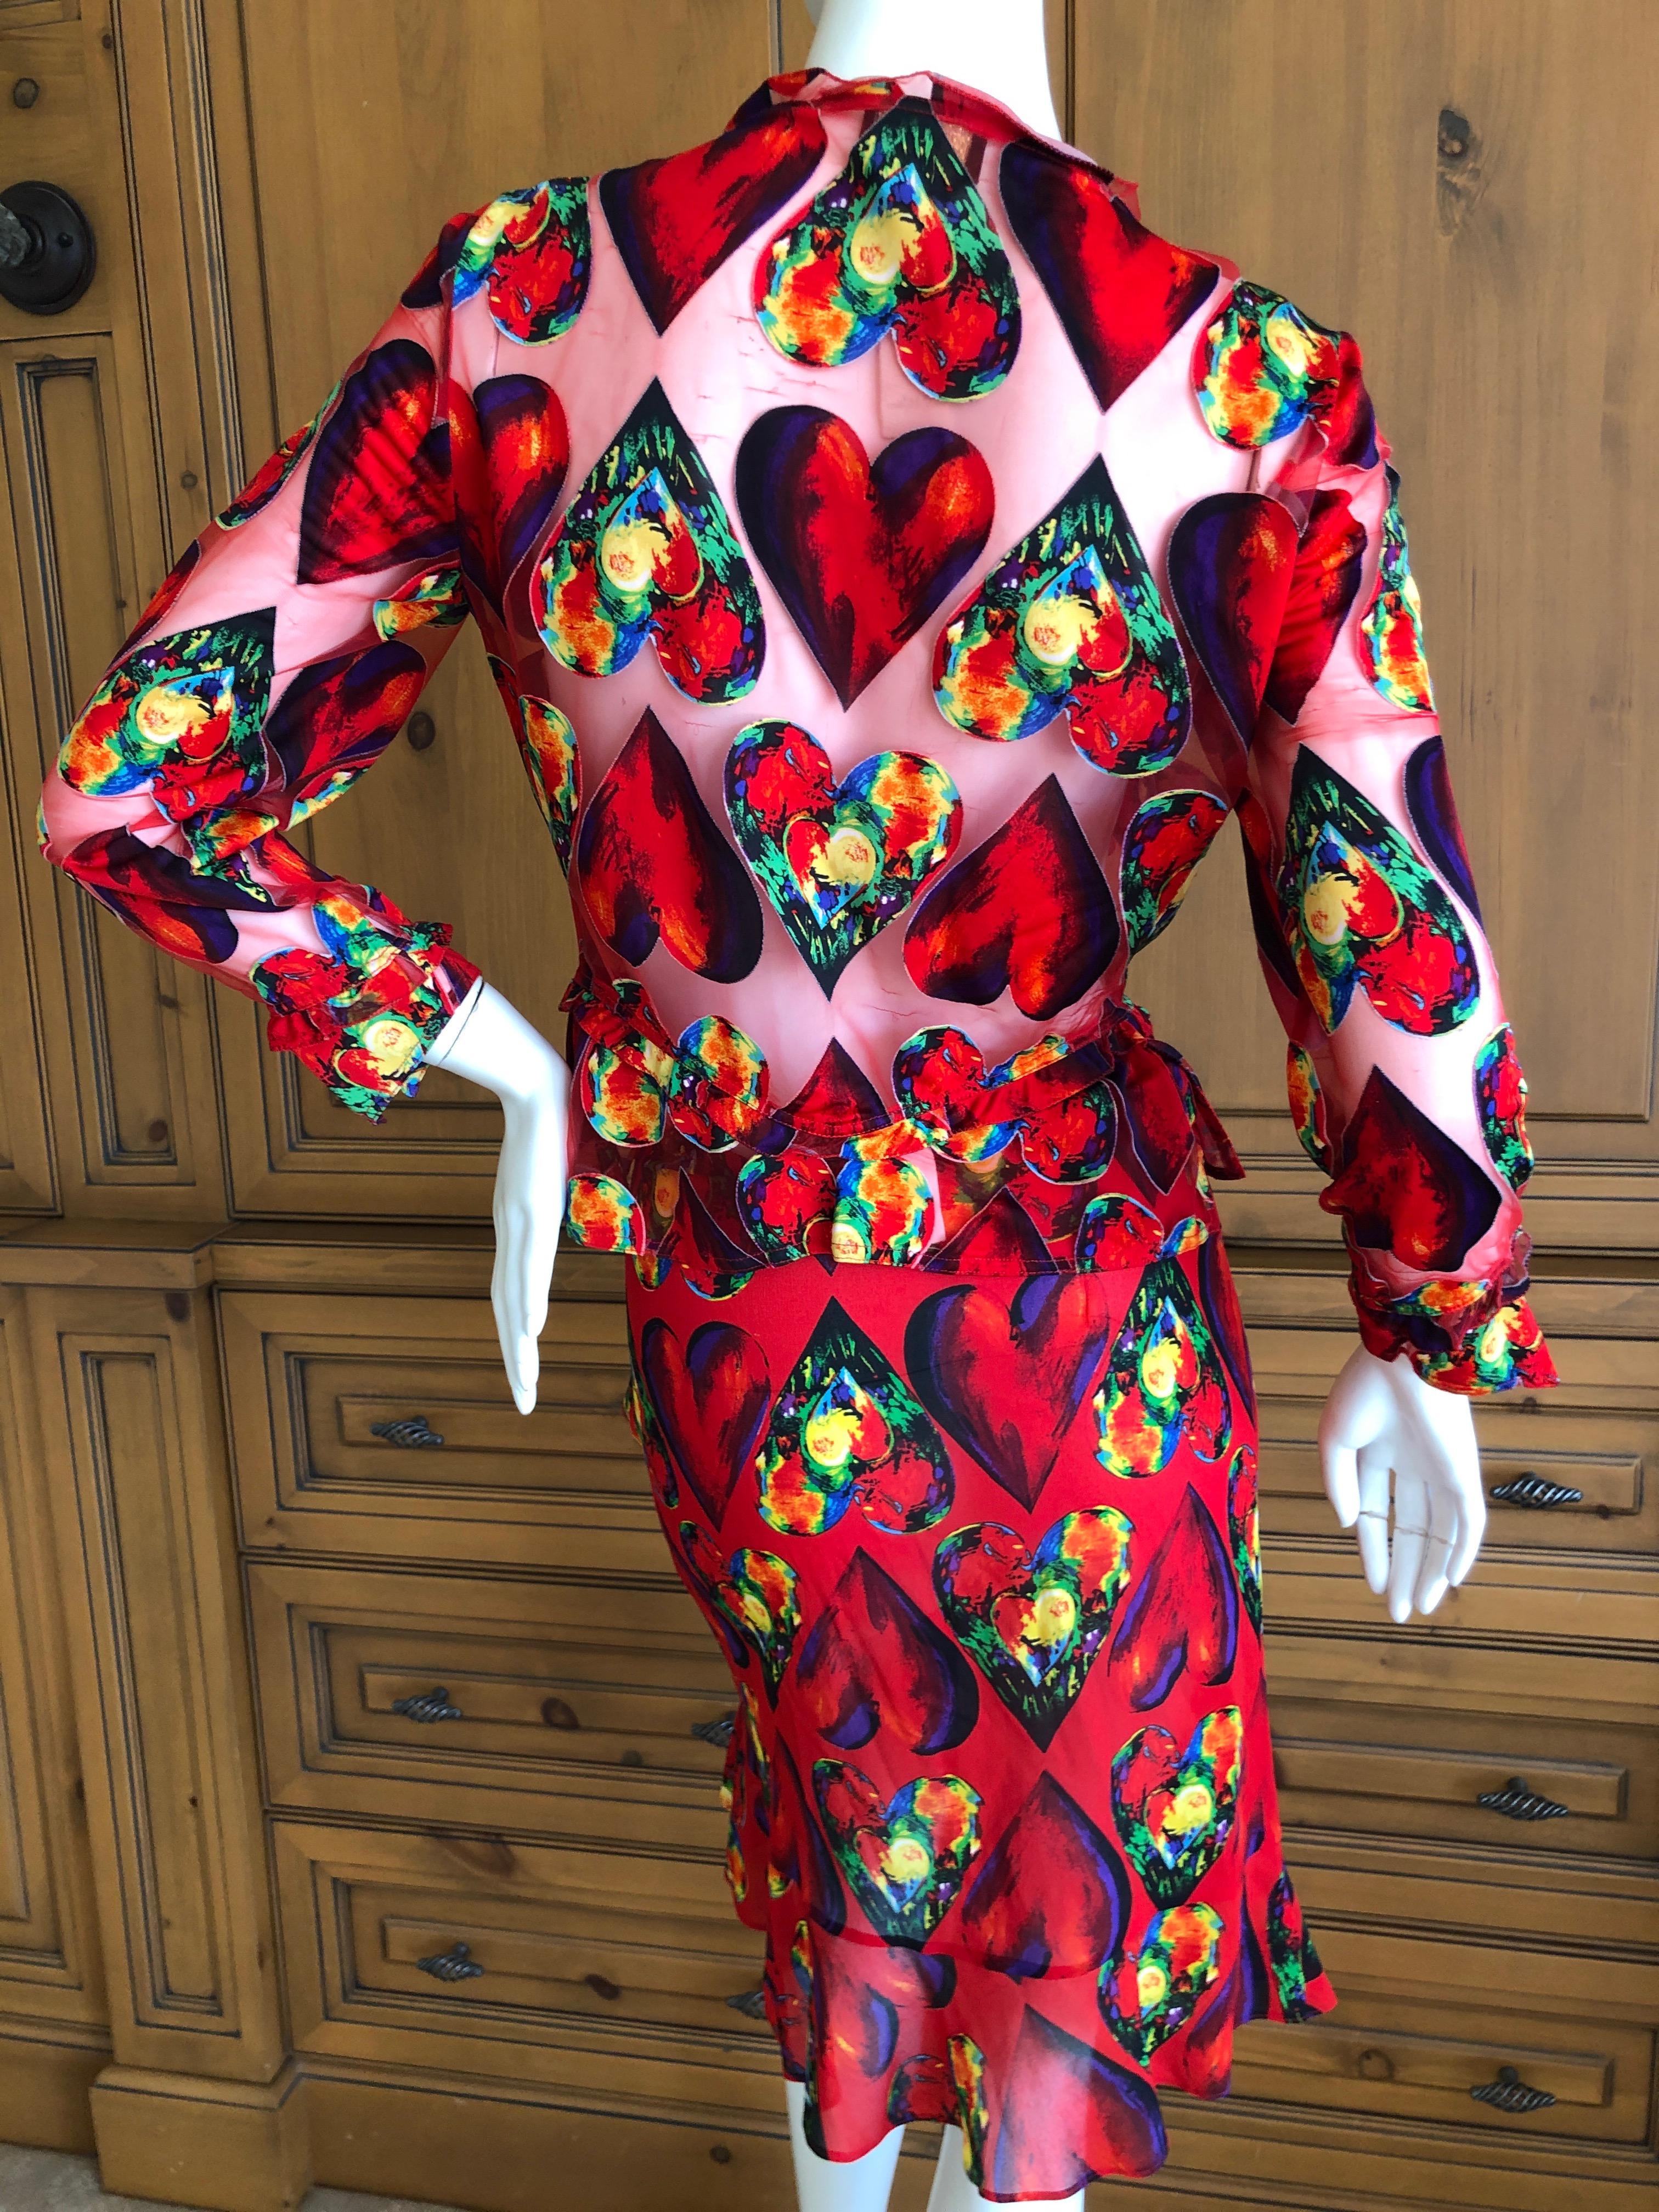 Gianni Versace Couture Spring 1997 Jim Dine Heart Print Sheer Skirt Suit For Sale 5